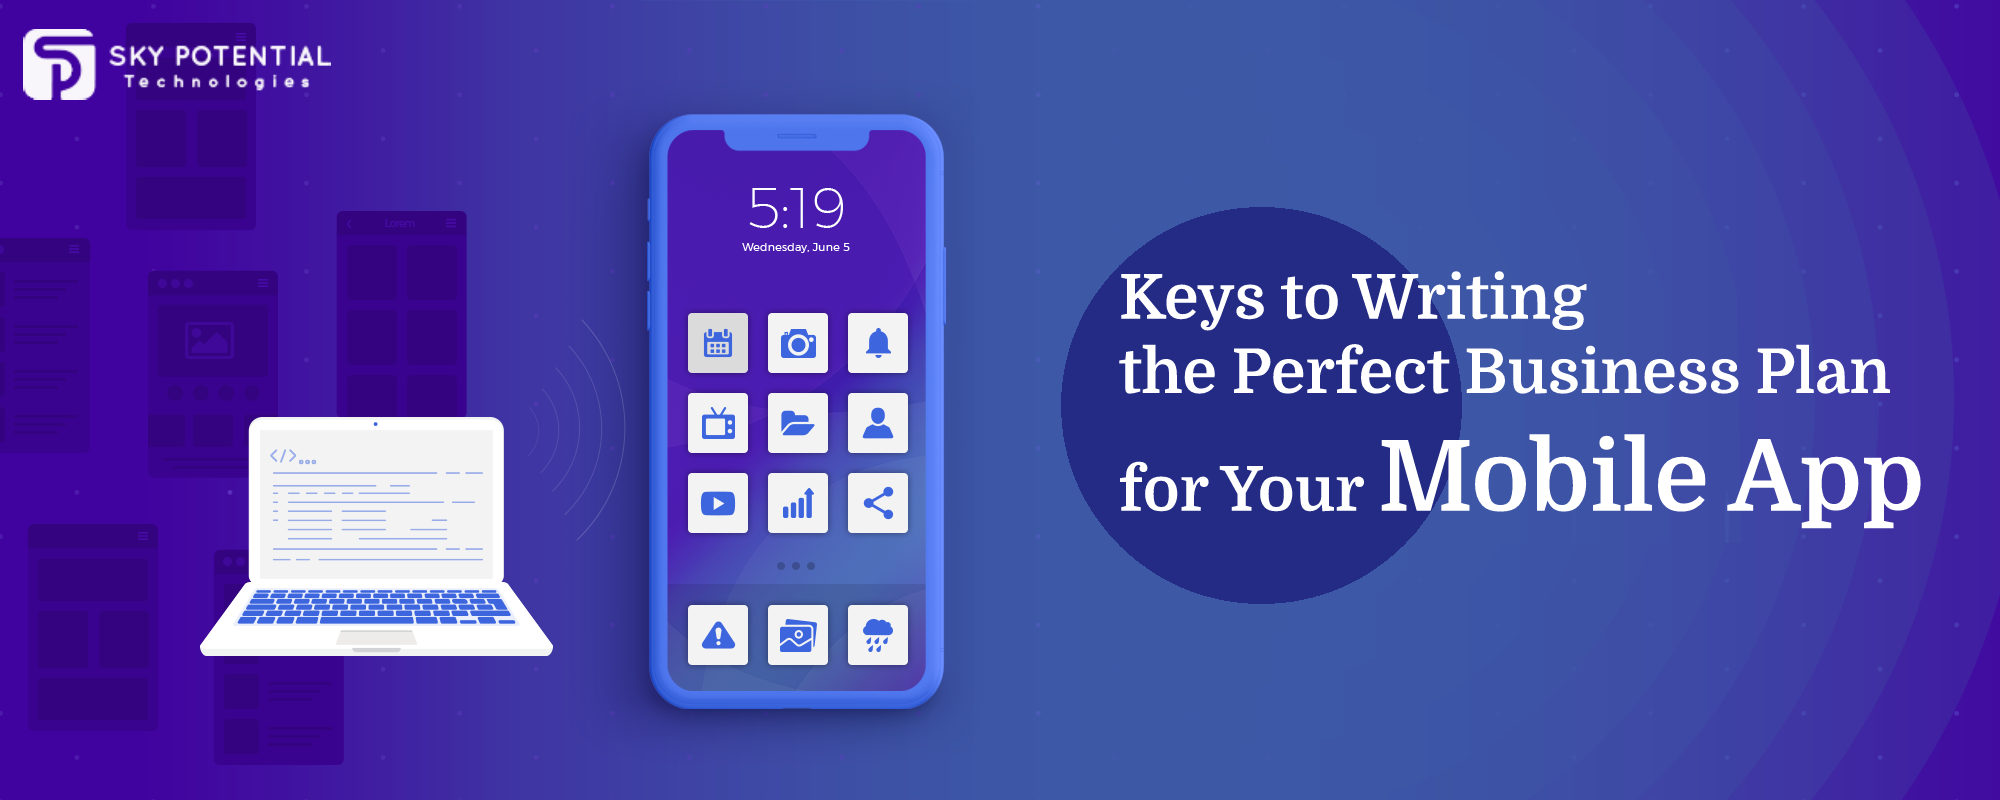 Keys to Writing the Perfect Business Plan for Your Mobile App